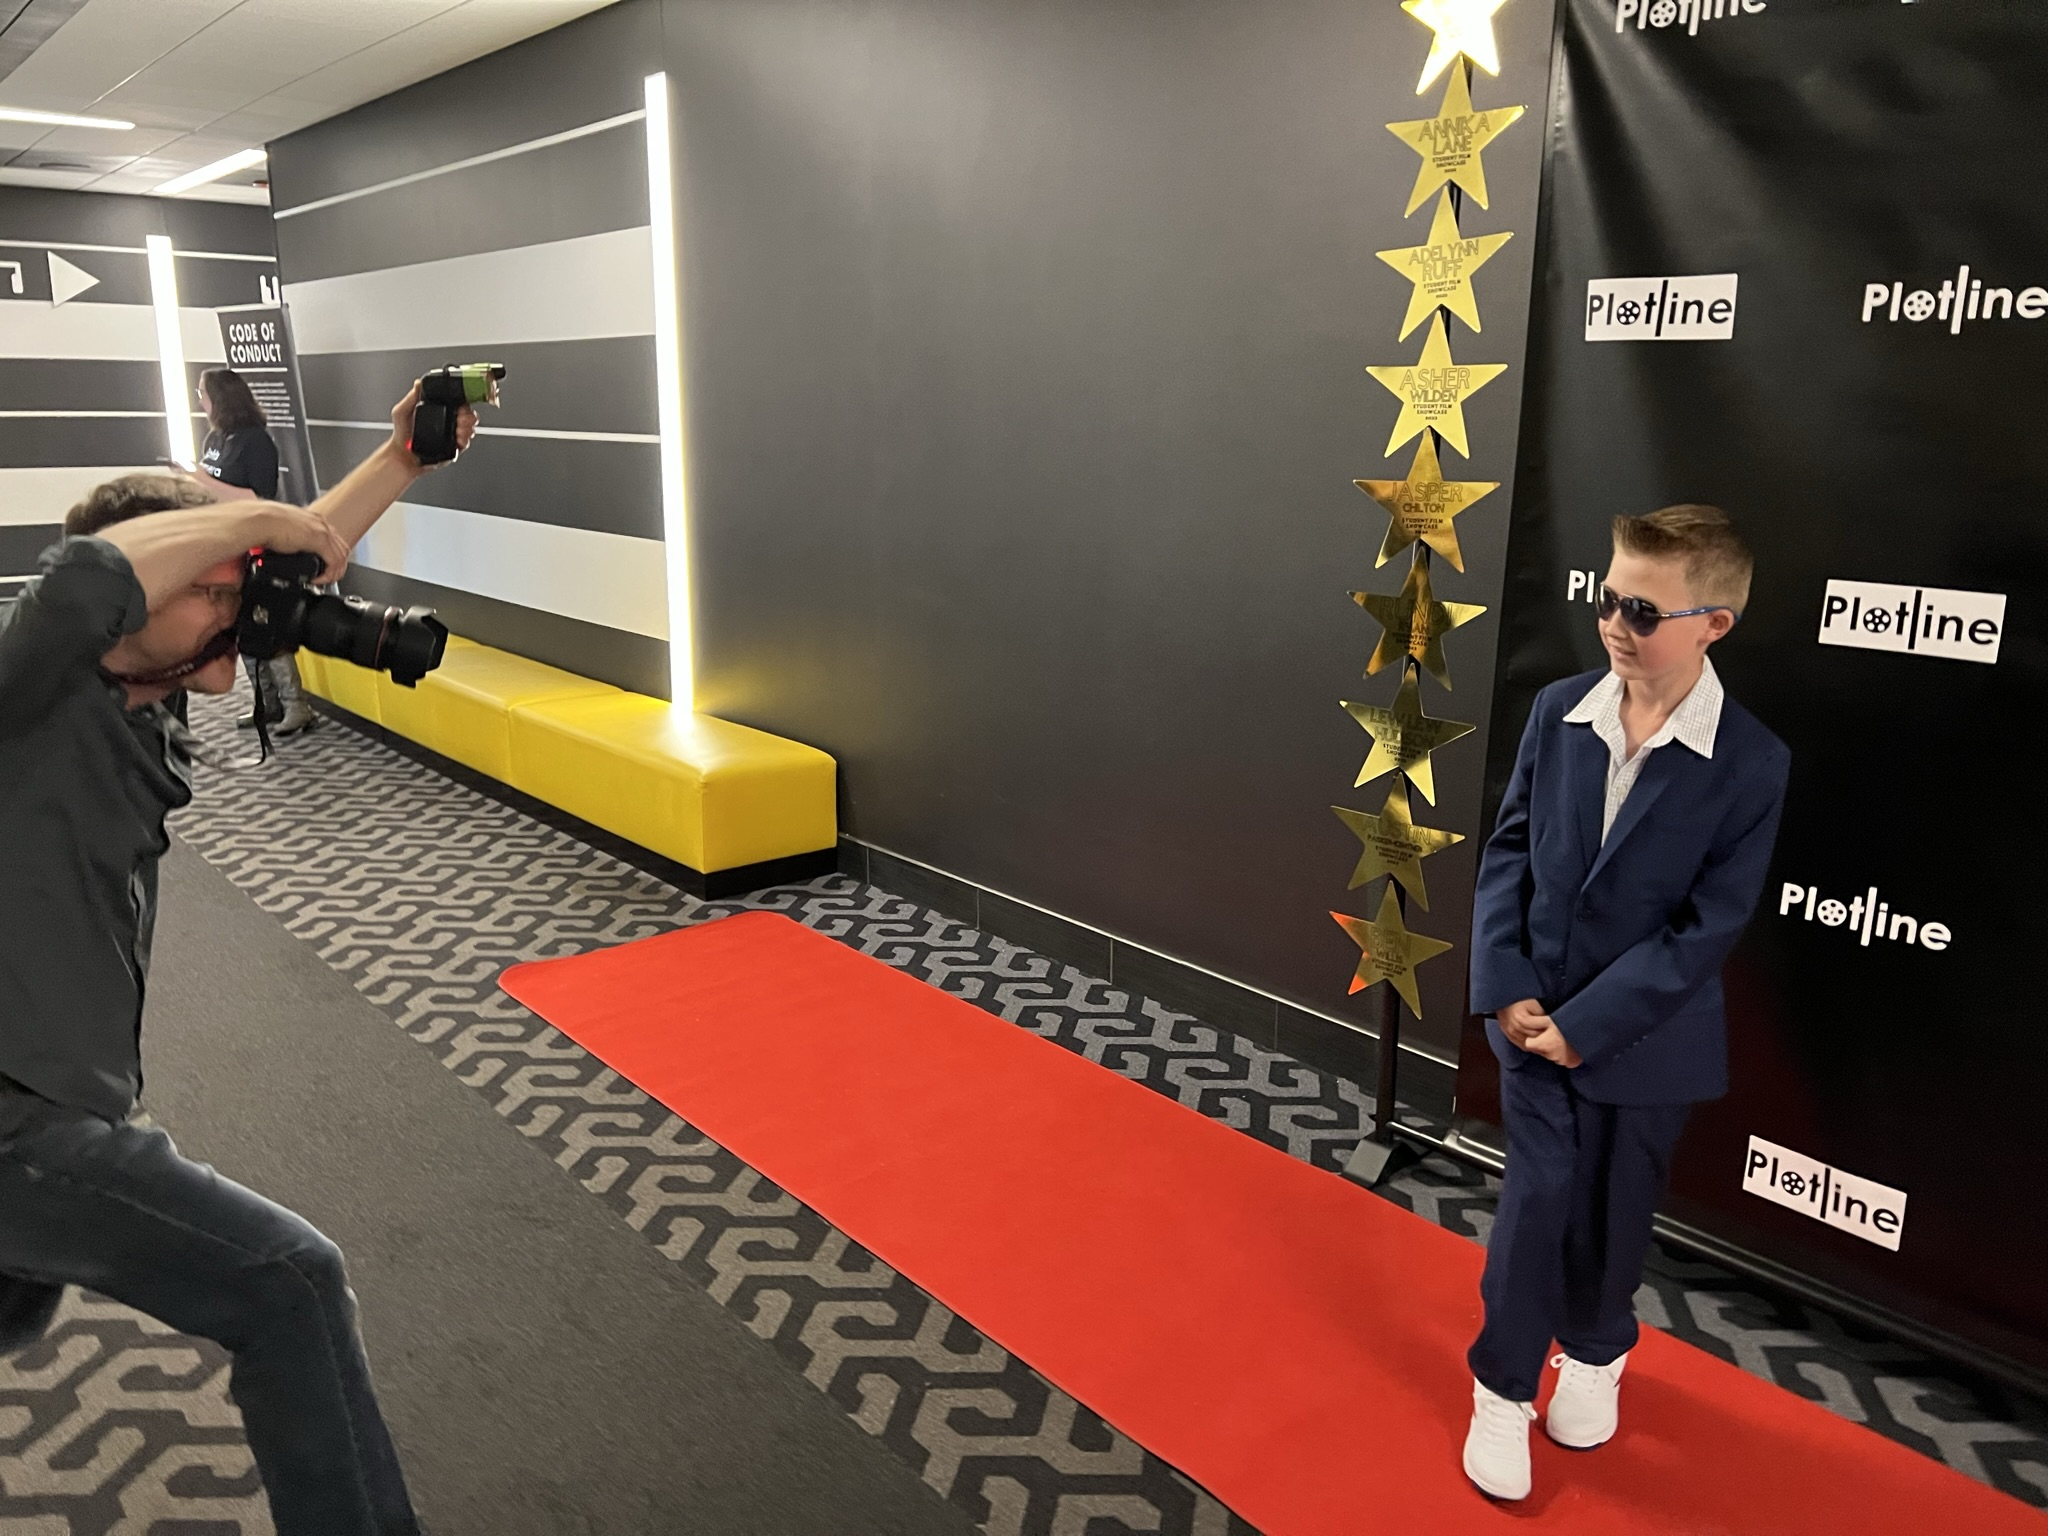 A child wearing a suit and sunglasses poses for a photo in front of a backdrop reading "Plotline"